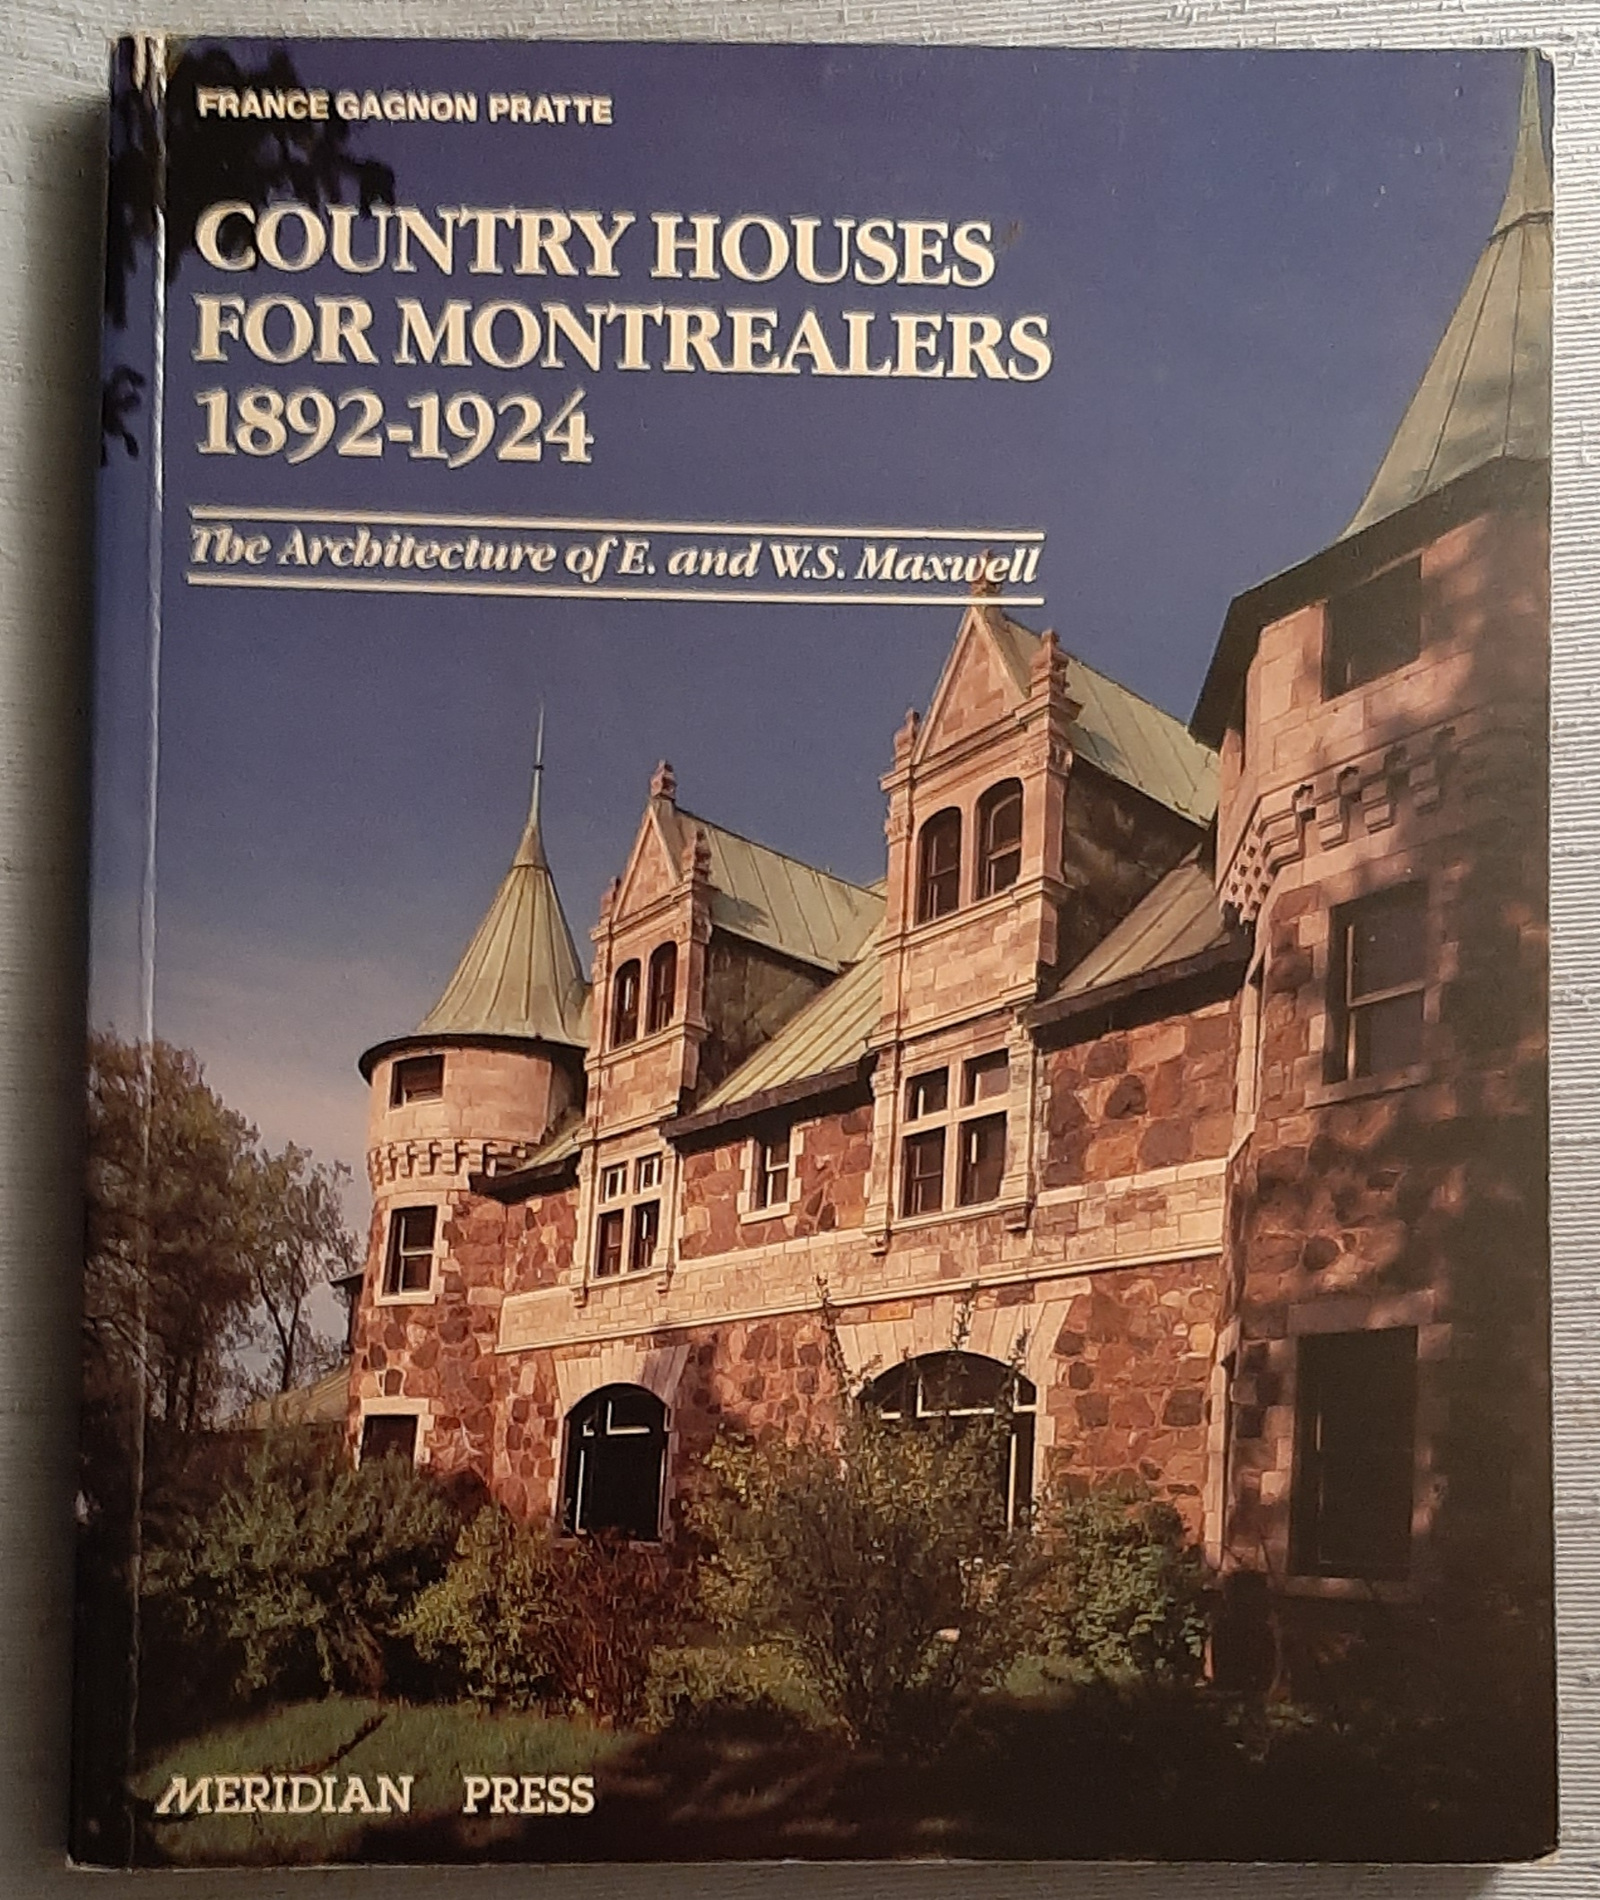 Country Houses for Montrealers, 1892 - 1924